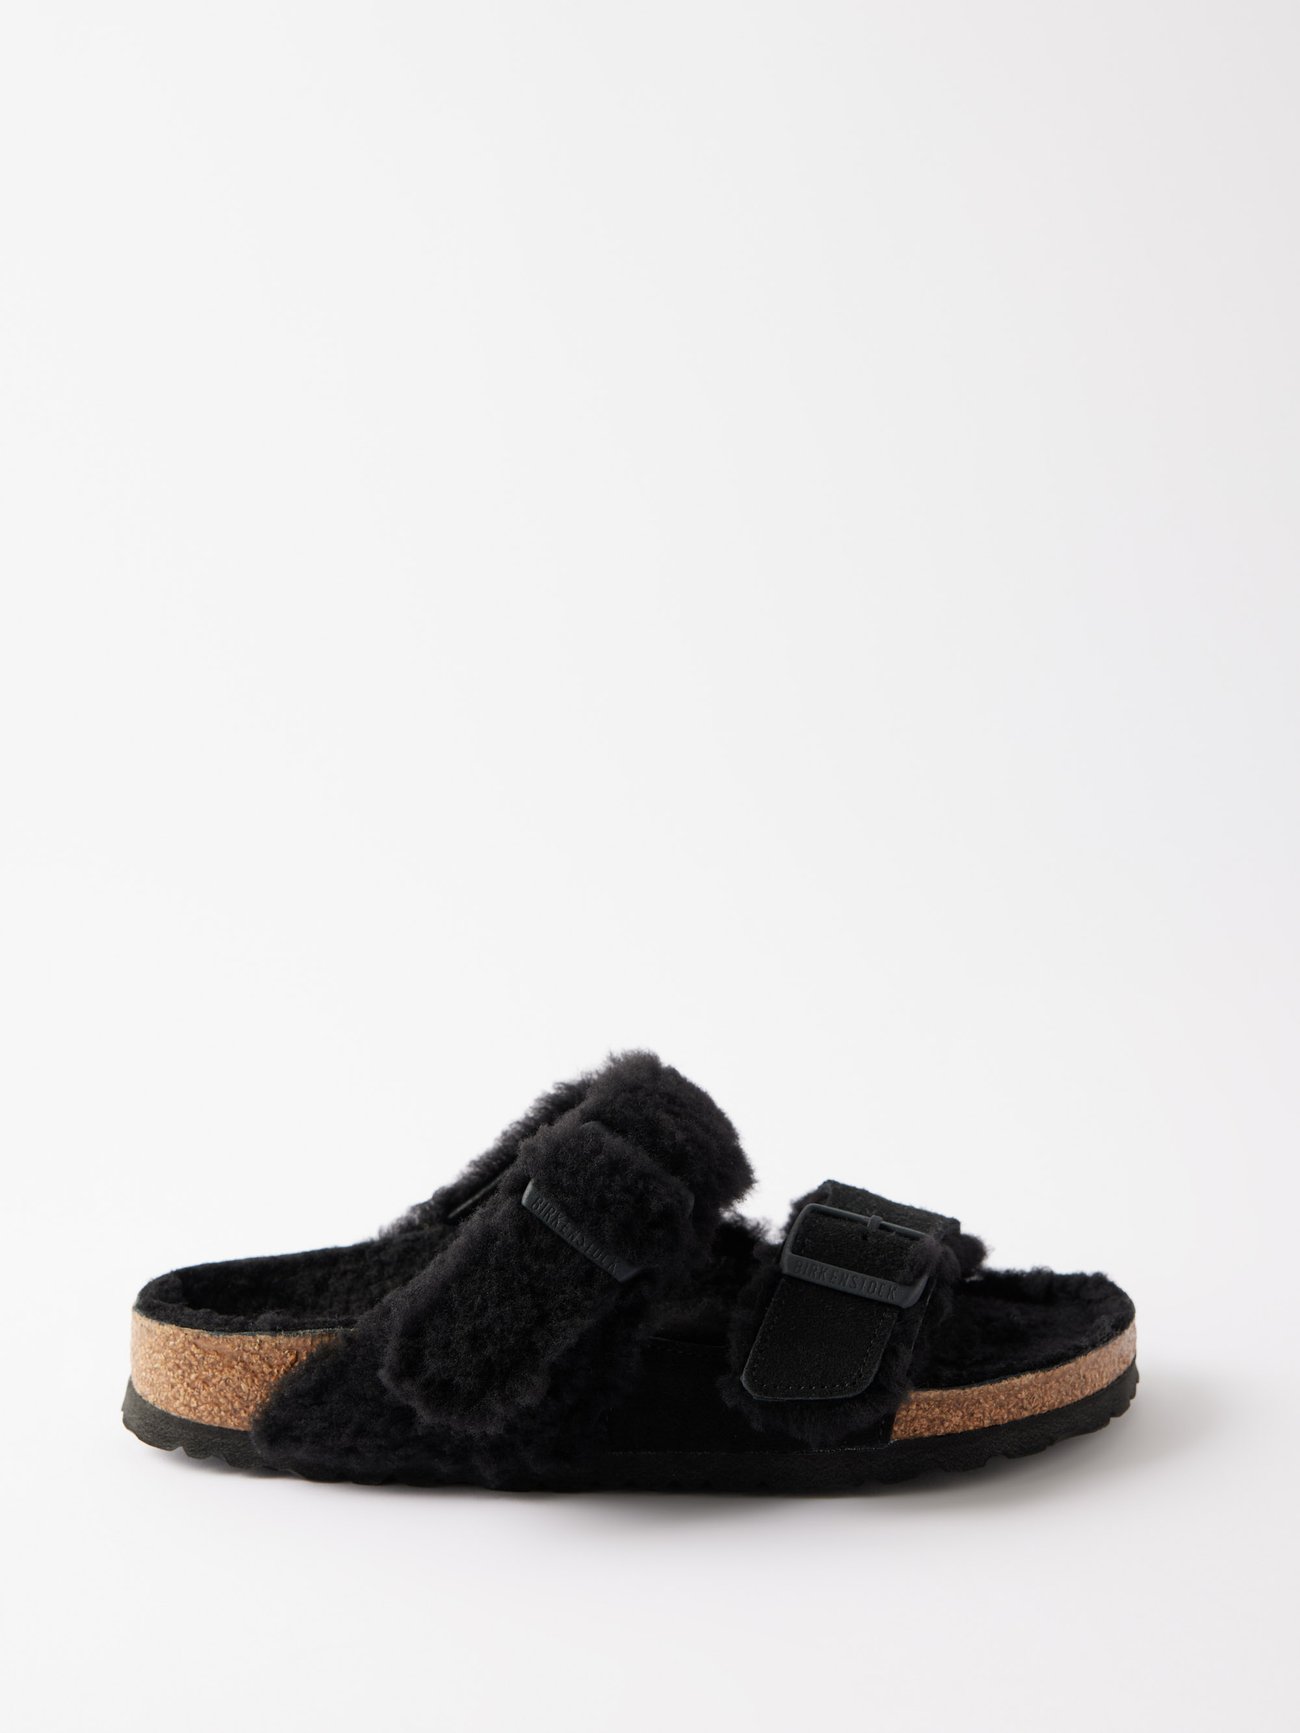 Arizona shearling-lined sandals video